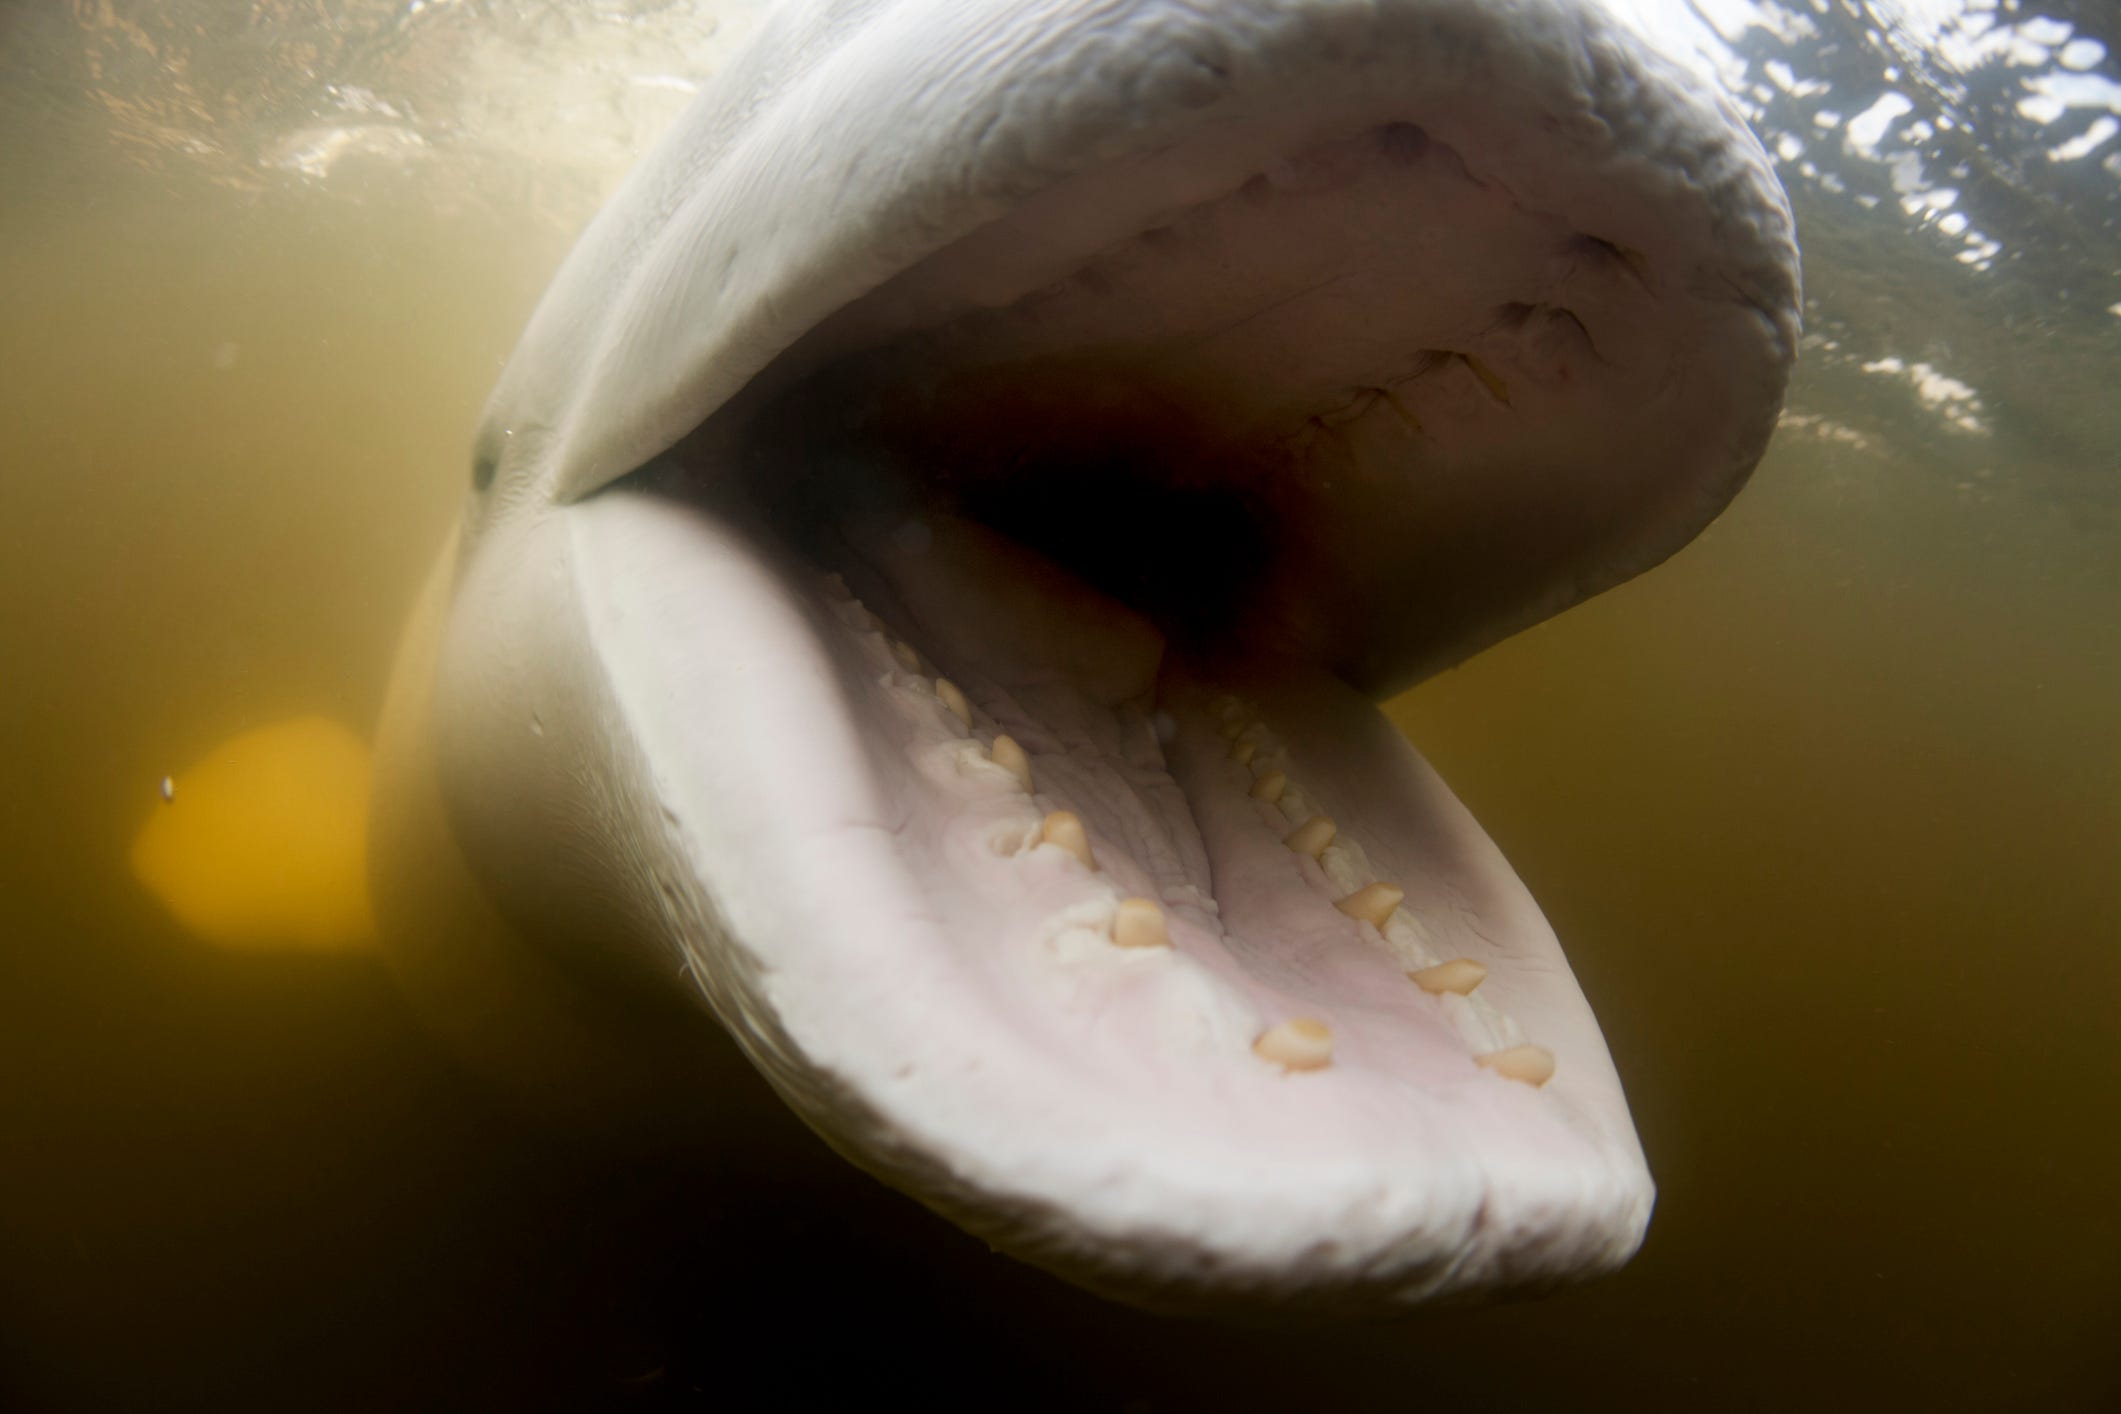 A beluga whale with its mouth open, looking hungry and eager